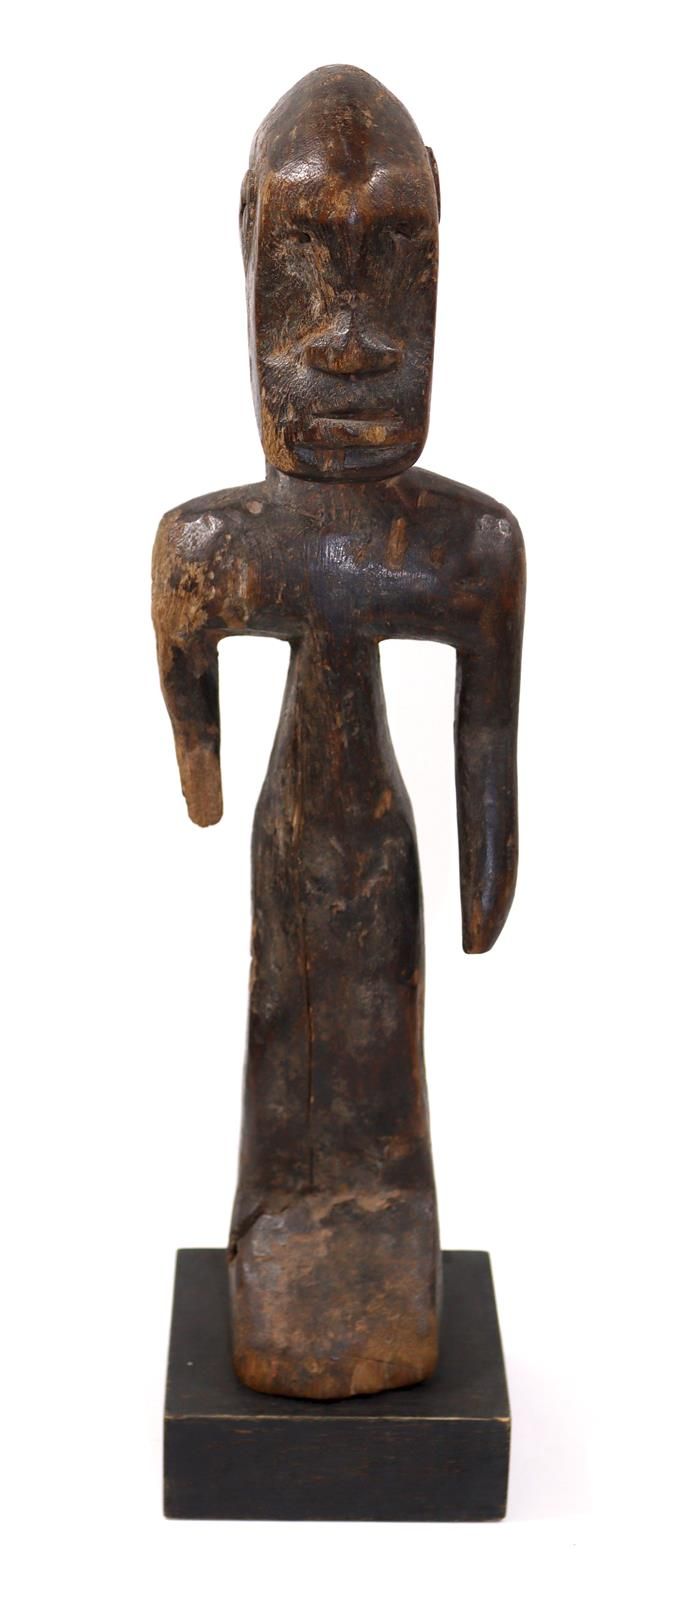 Dogon, Mali. Ancient figure of the Dogon. Plain, simple carving. Age patina. Cra&hellip;